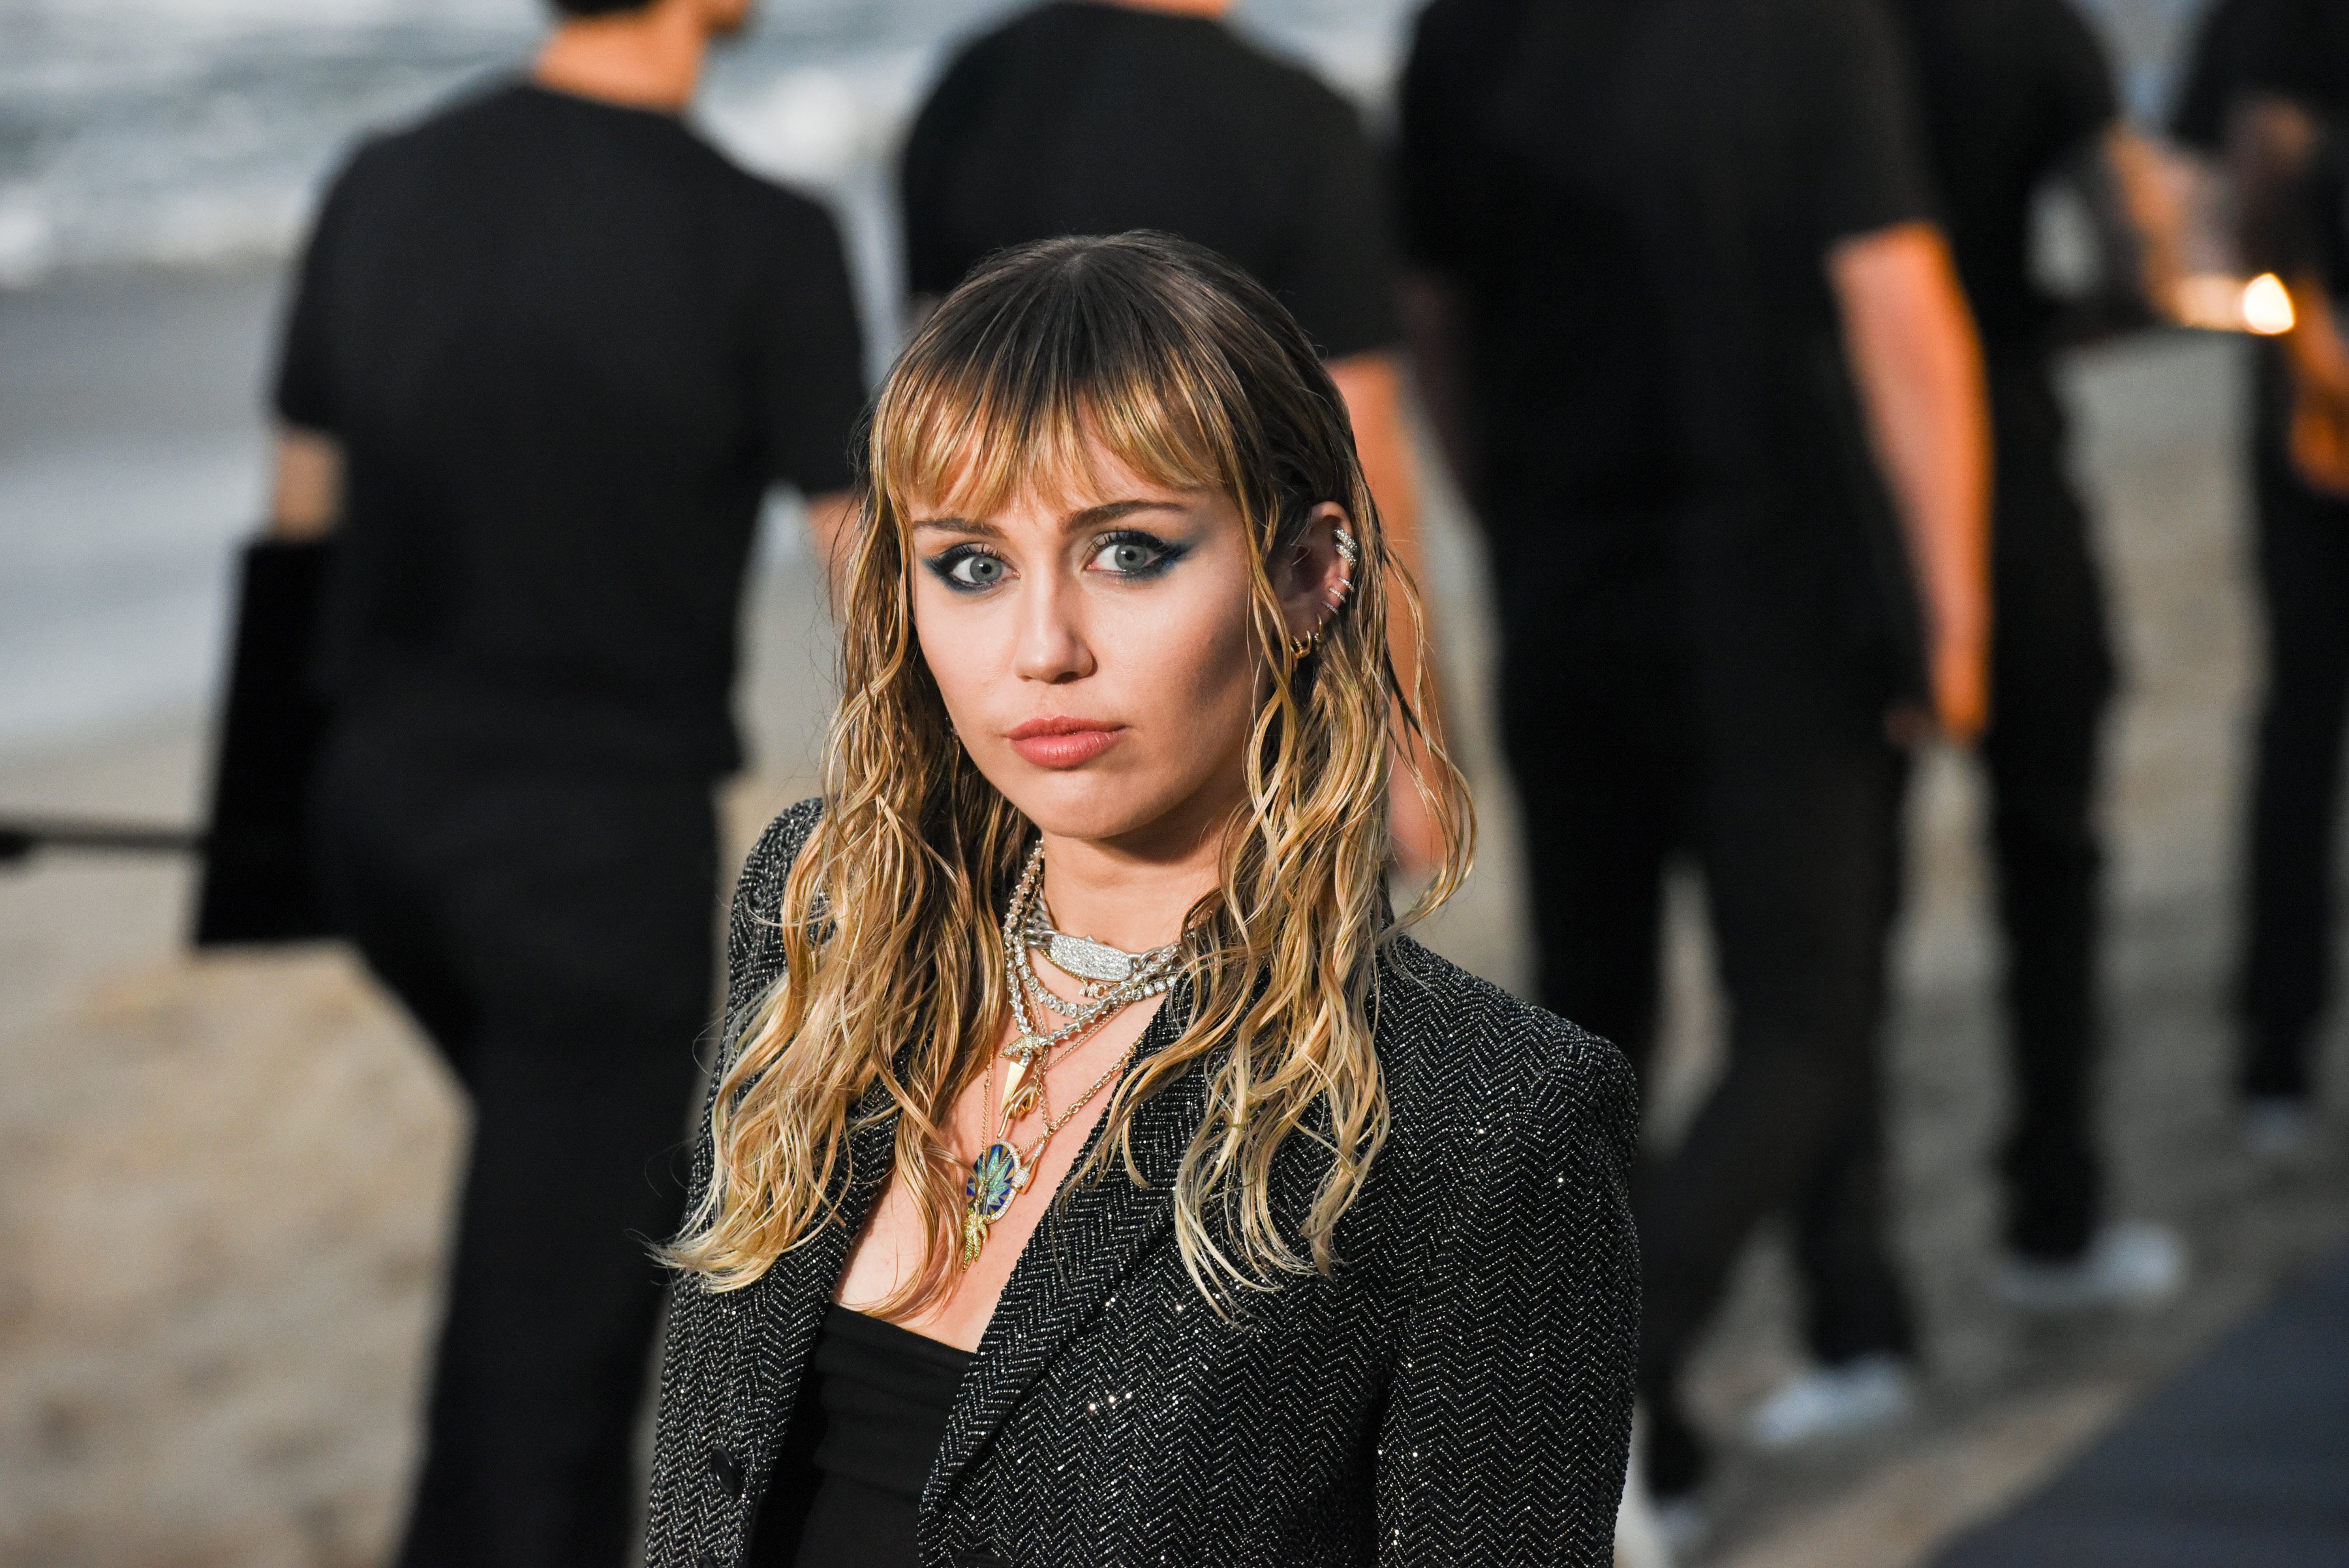 Miley Cyrus at Saint Laurent mens spring summer 20 show on June 06, 2019, in Malibu, California. | Source: Getty Images.